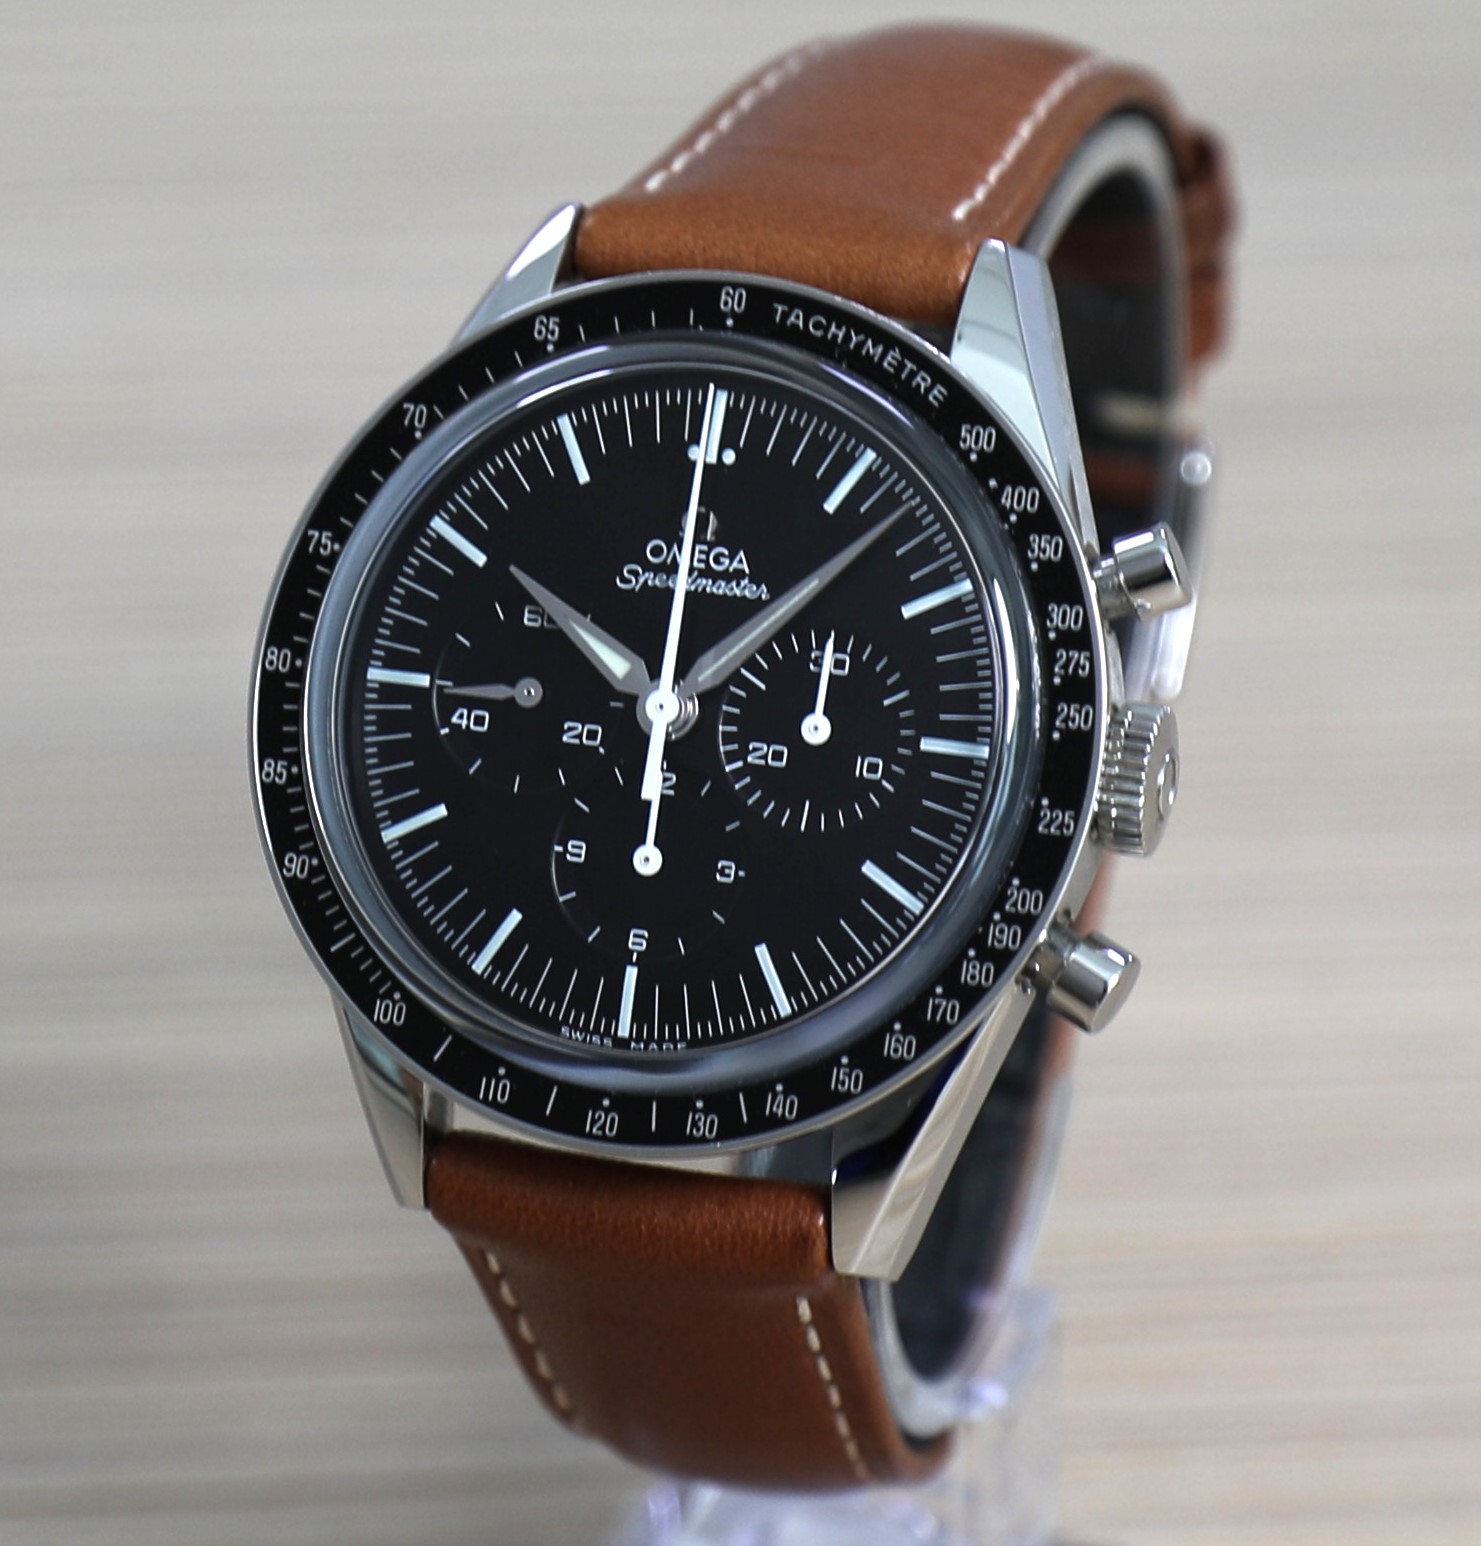 Omega Speedmaster Moonwatch Anniversary First OMEGA In Space